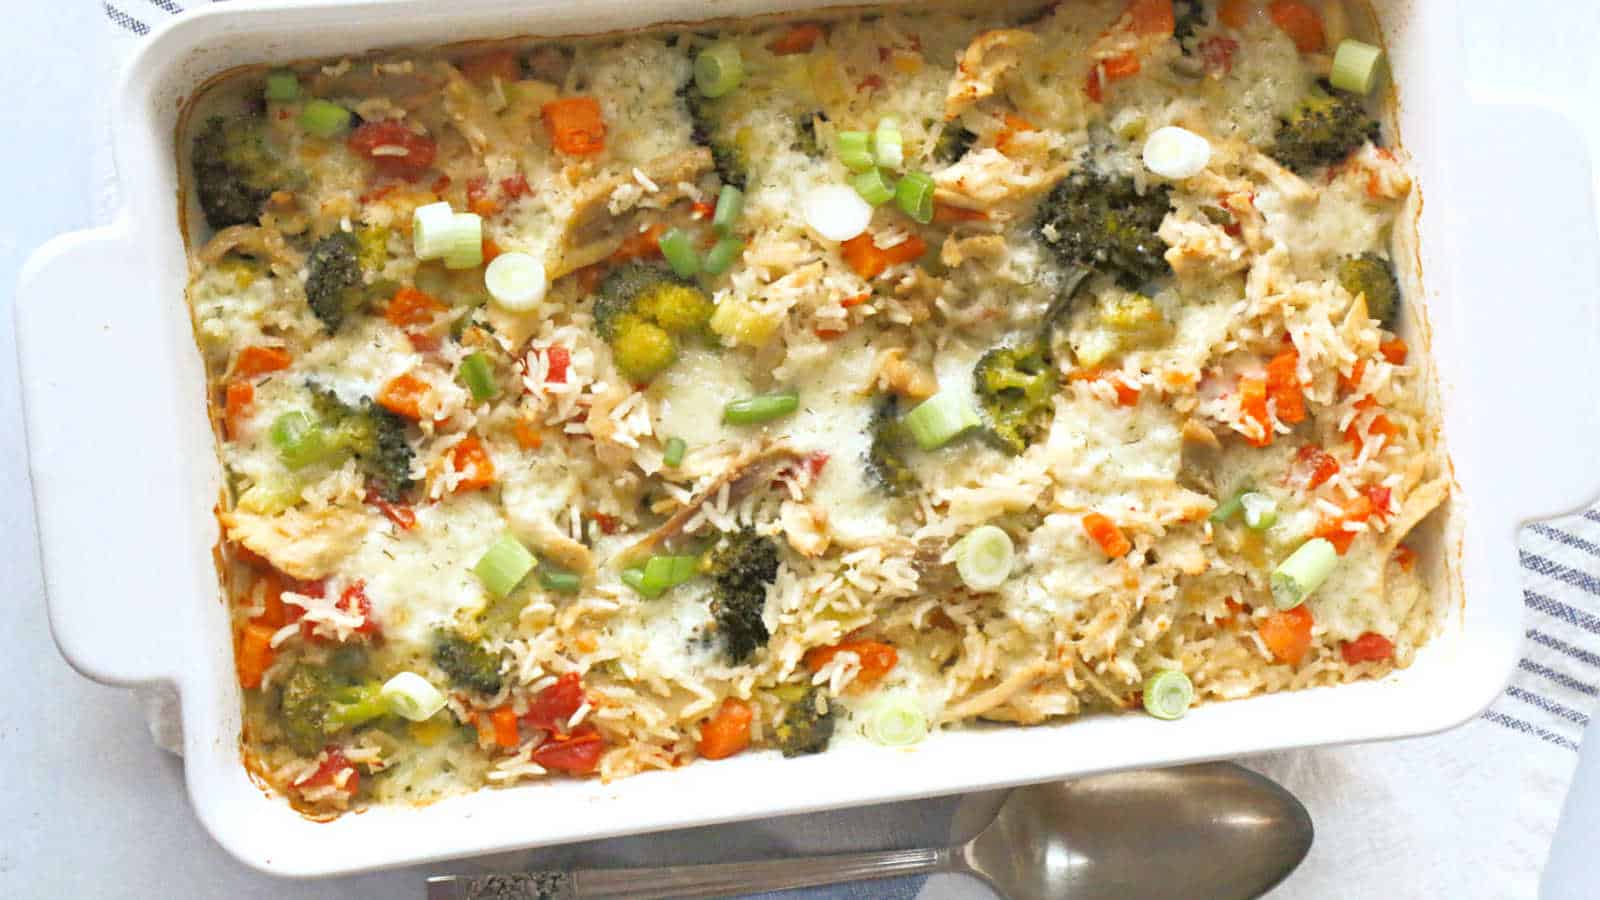 Turkey and vegetable casserole in a white dish.